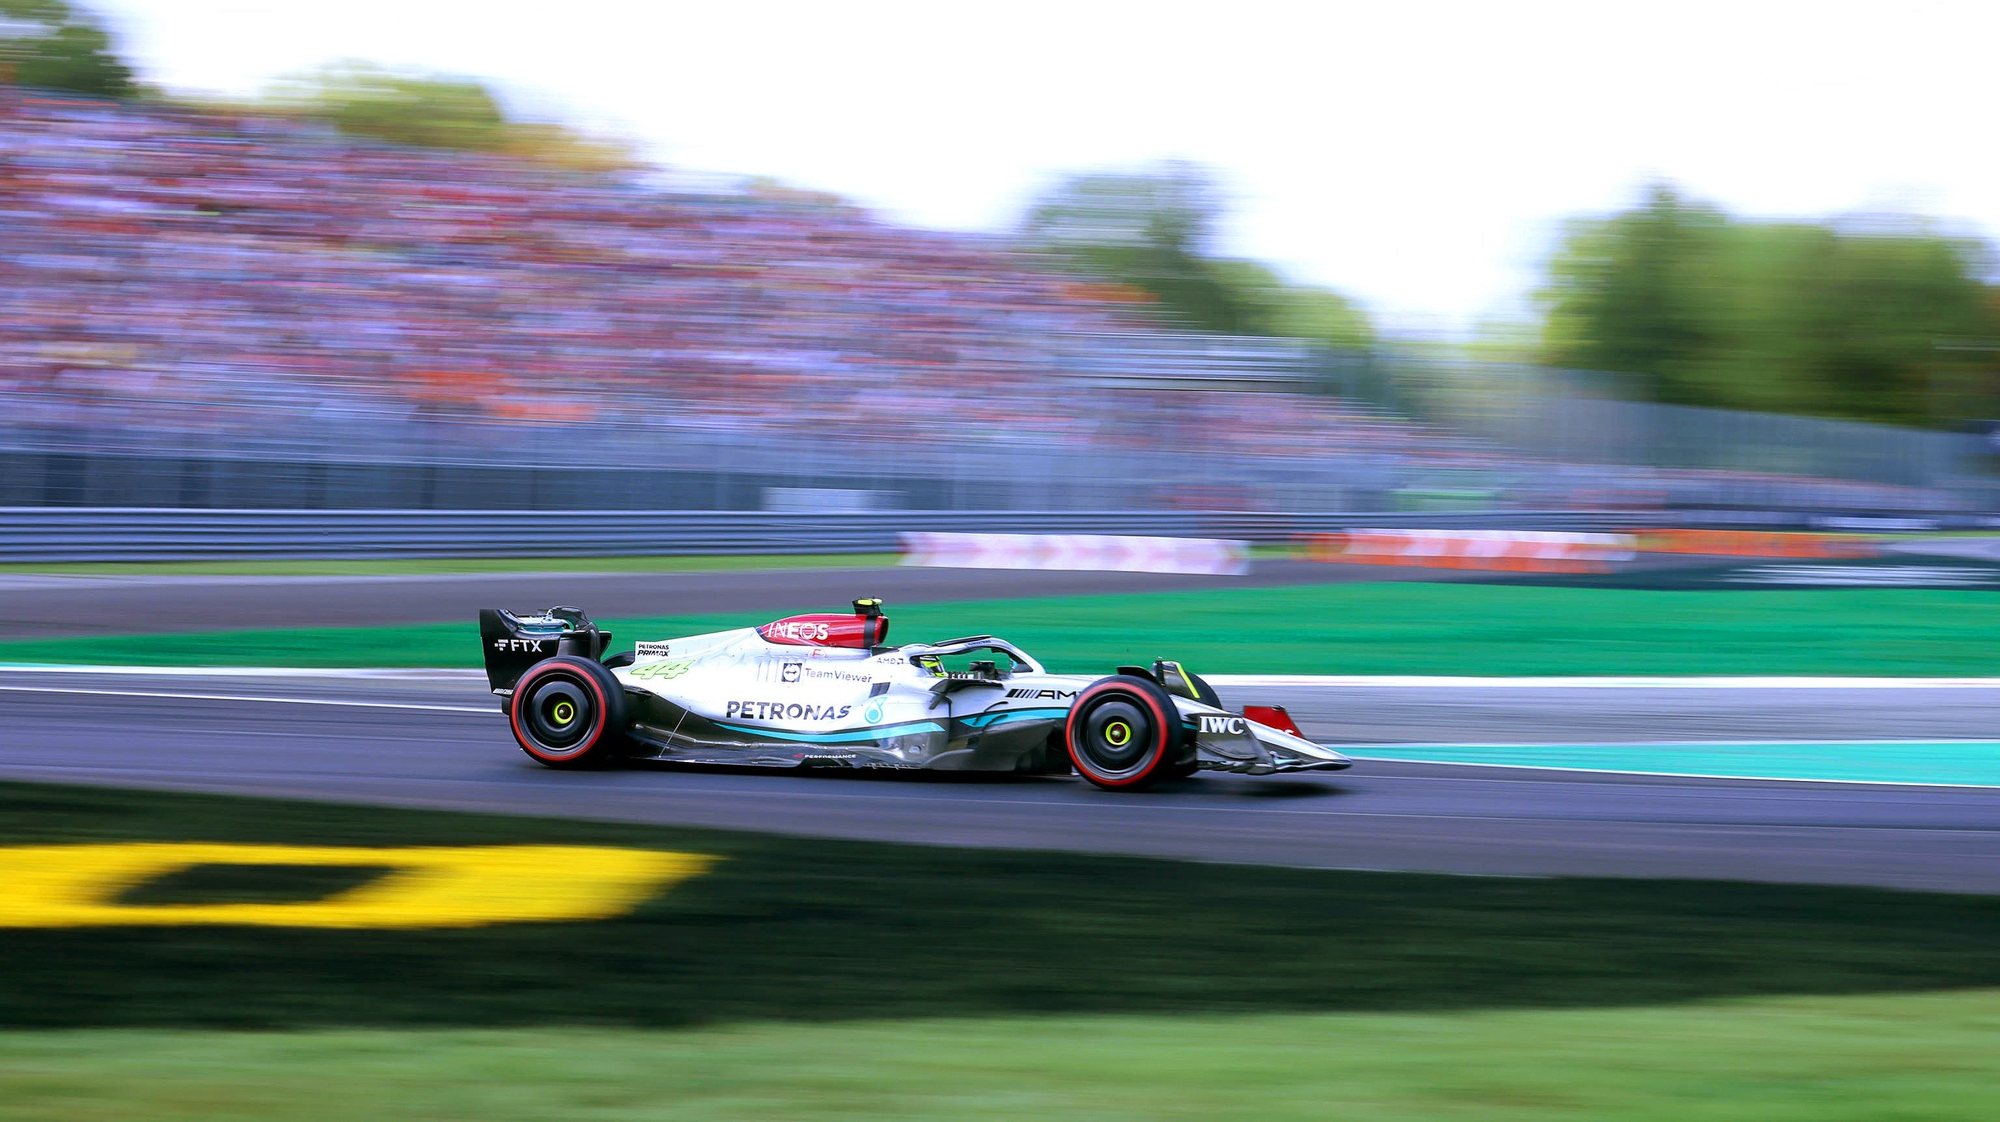 epa10173490 British Formula One driver Lewis Hamilton of Mercedes-AMG Petronas in action during the first practice session of the Formula One Grand Prix of Italy at the Autodromo Nazionale Monza race track in Monza, Italy, 09 September 2022. The Formula One Grand Prix of Italy will take place on 11 September 2022.  EPA/MATTEO BAZZI